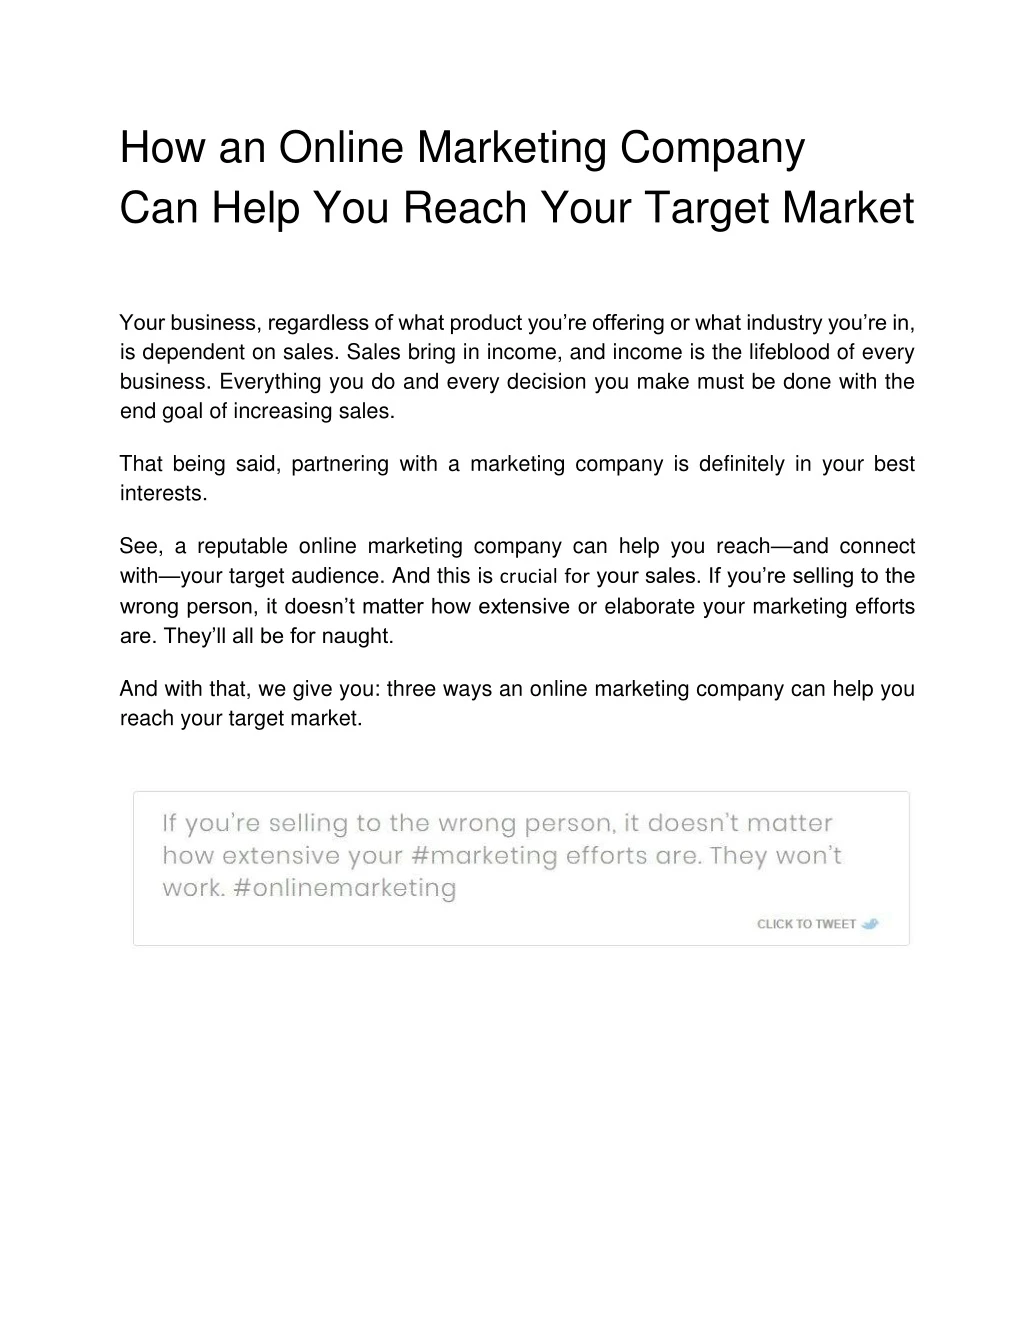 how an online marketing company can help